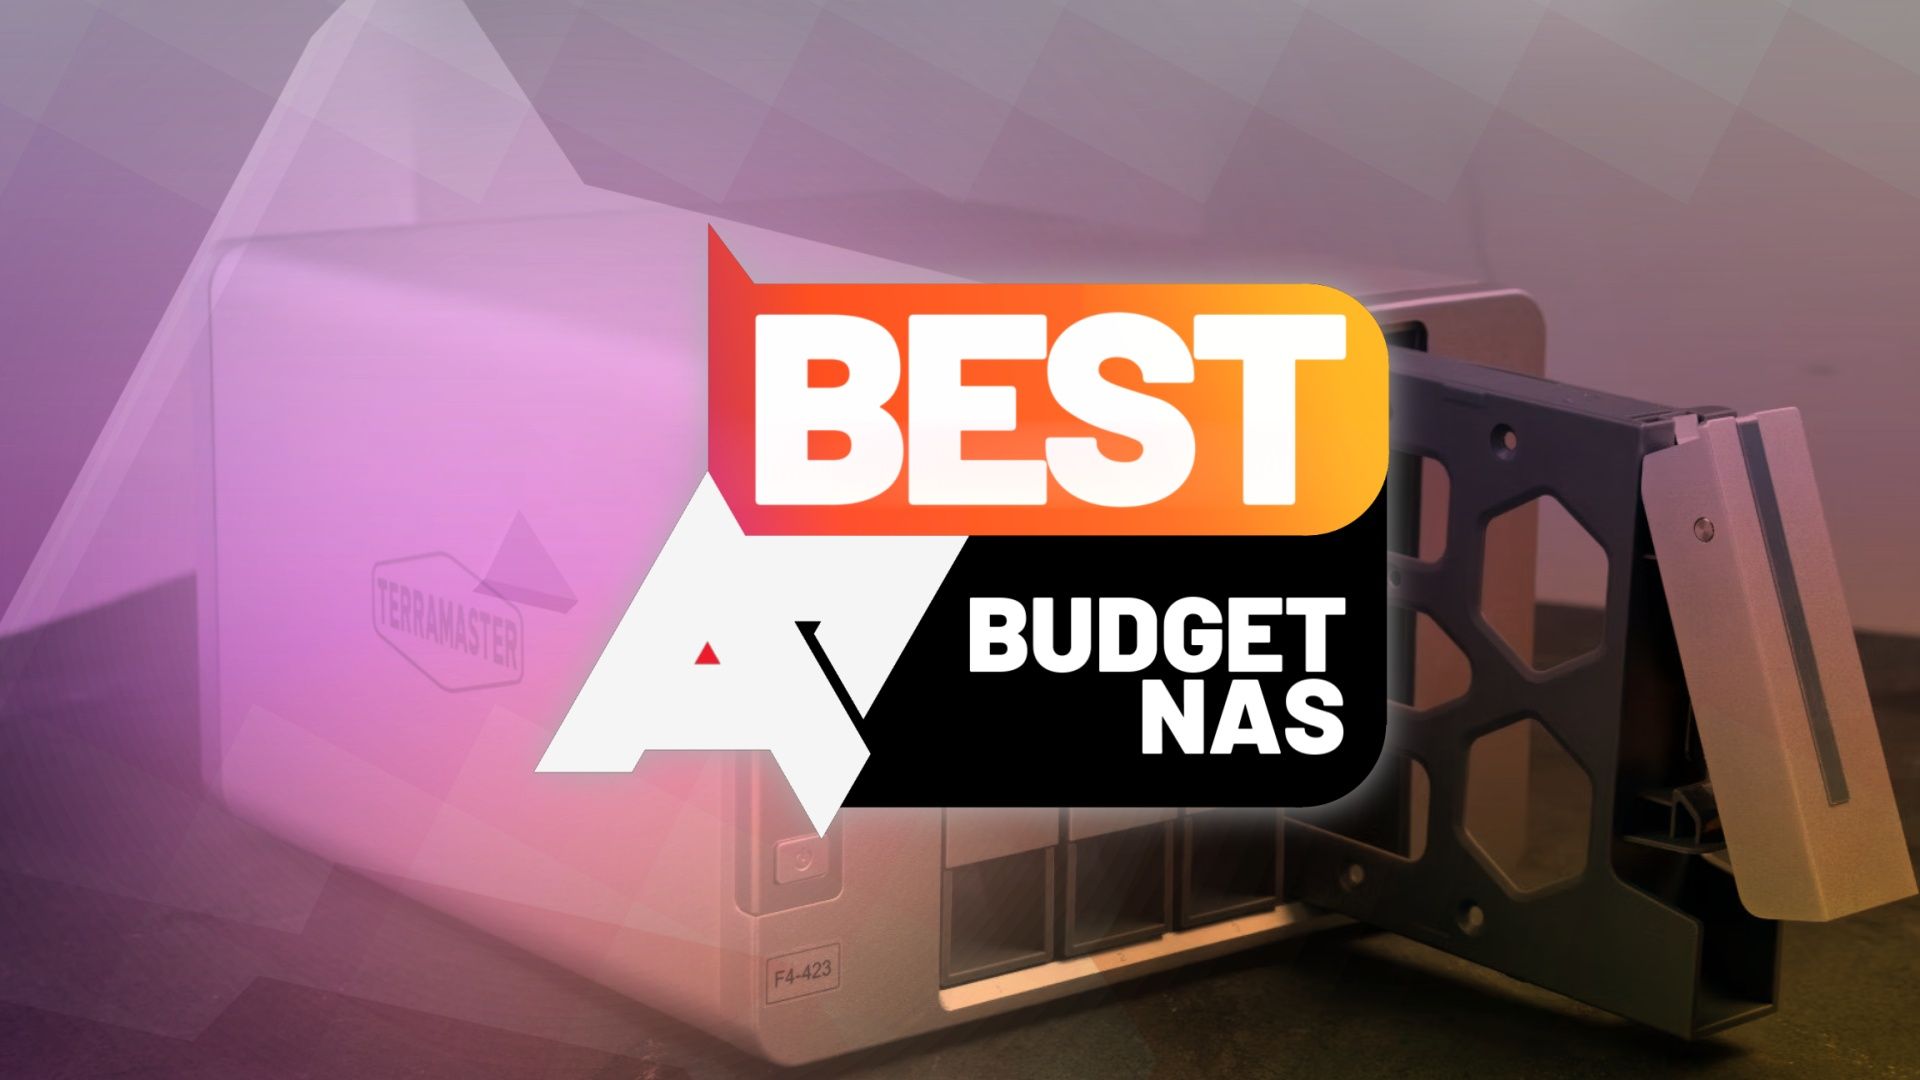 A photo of a 4-bay Terramaster NAS with one of the bays open, and an 'AP Best Budget NAS' logo in front